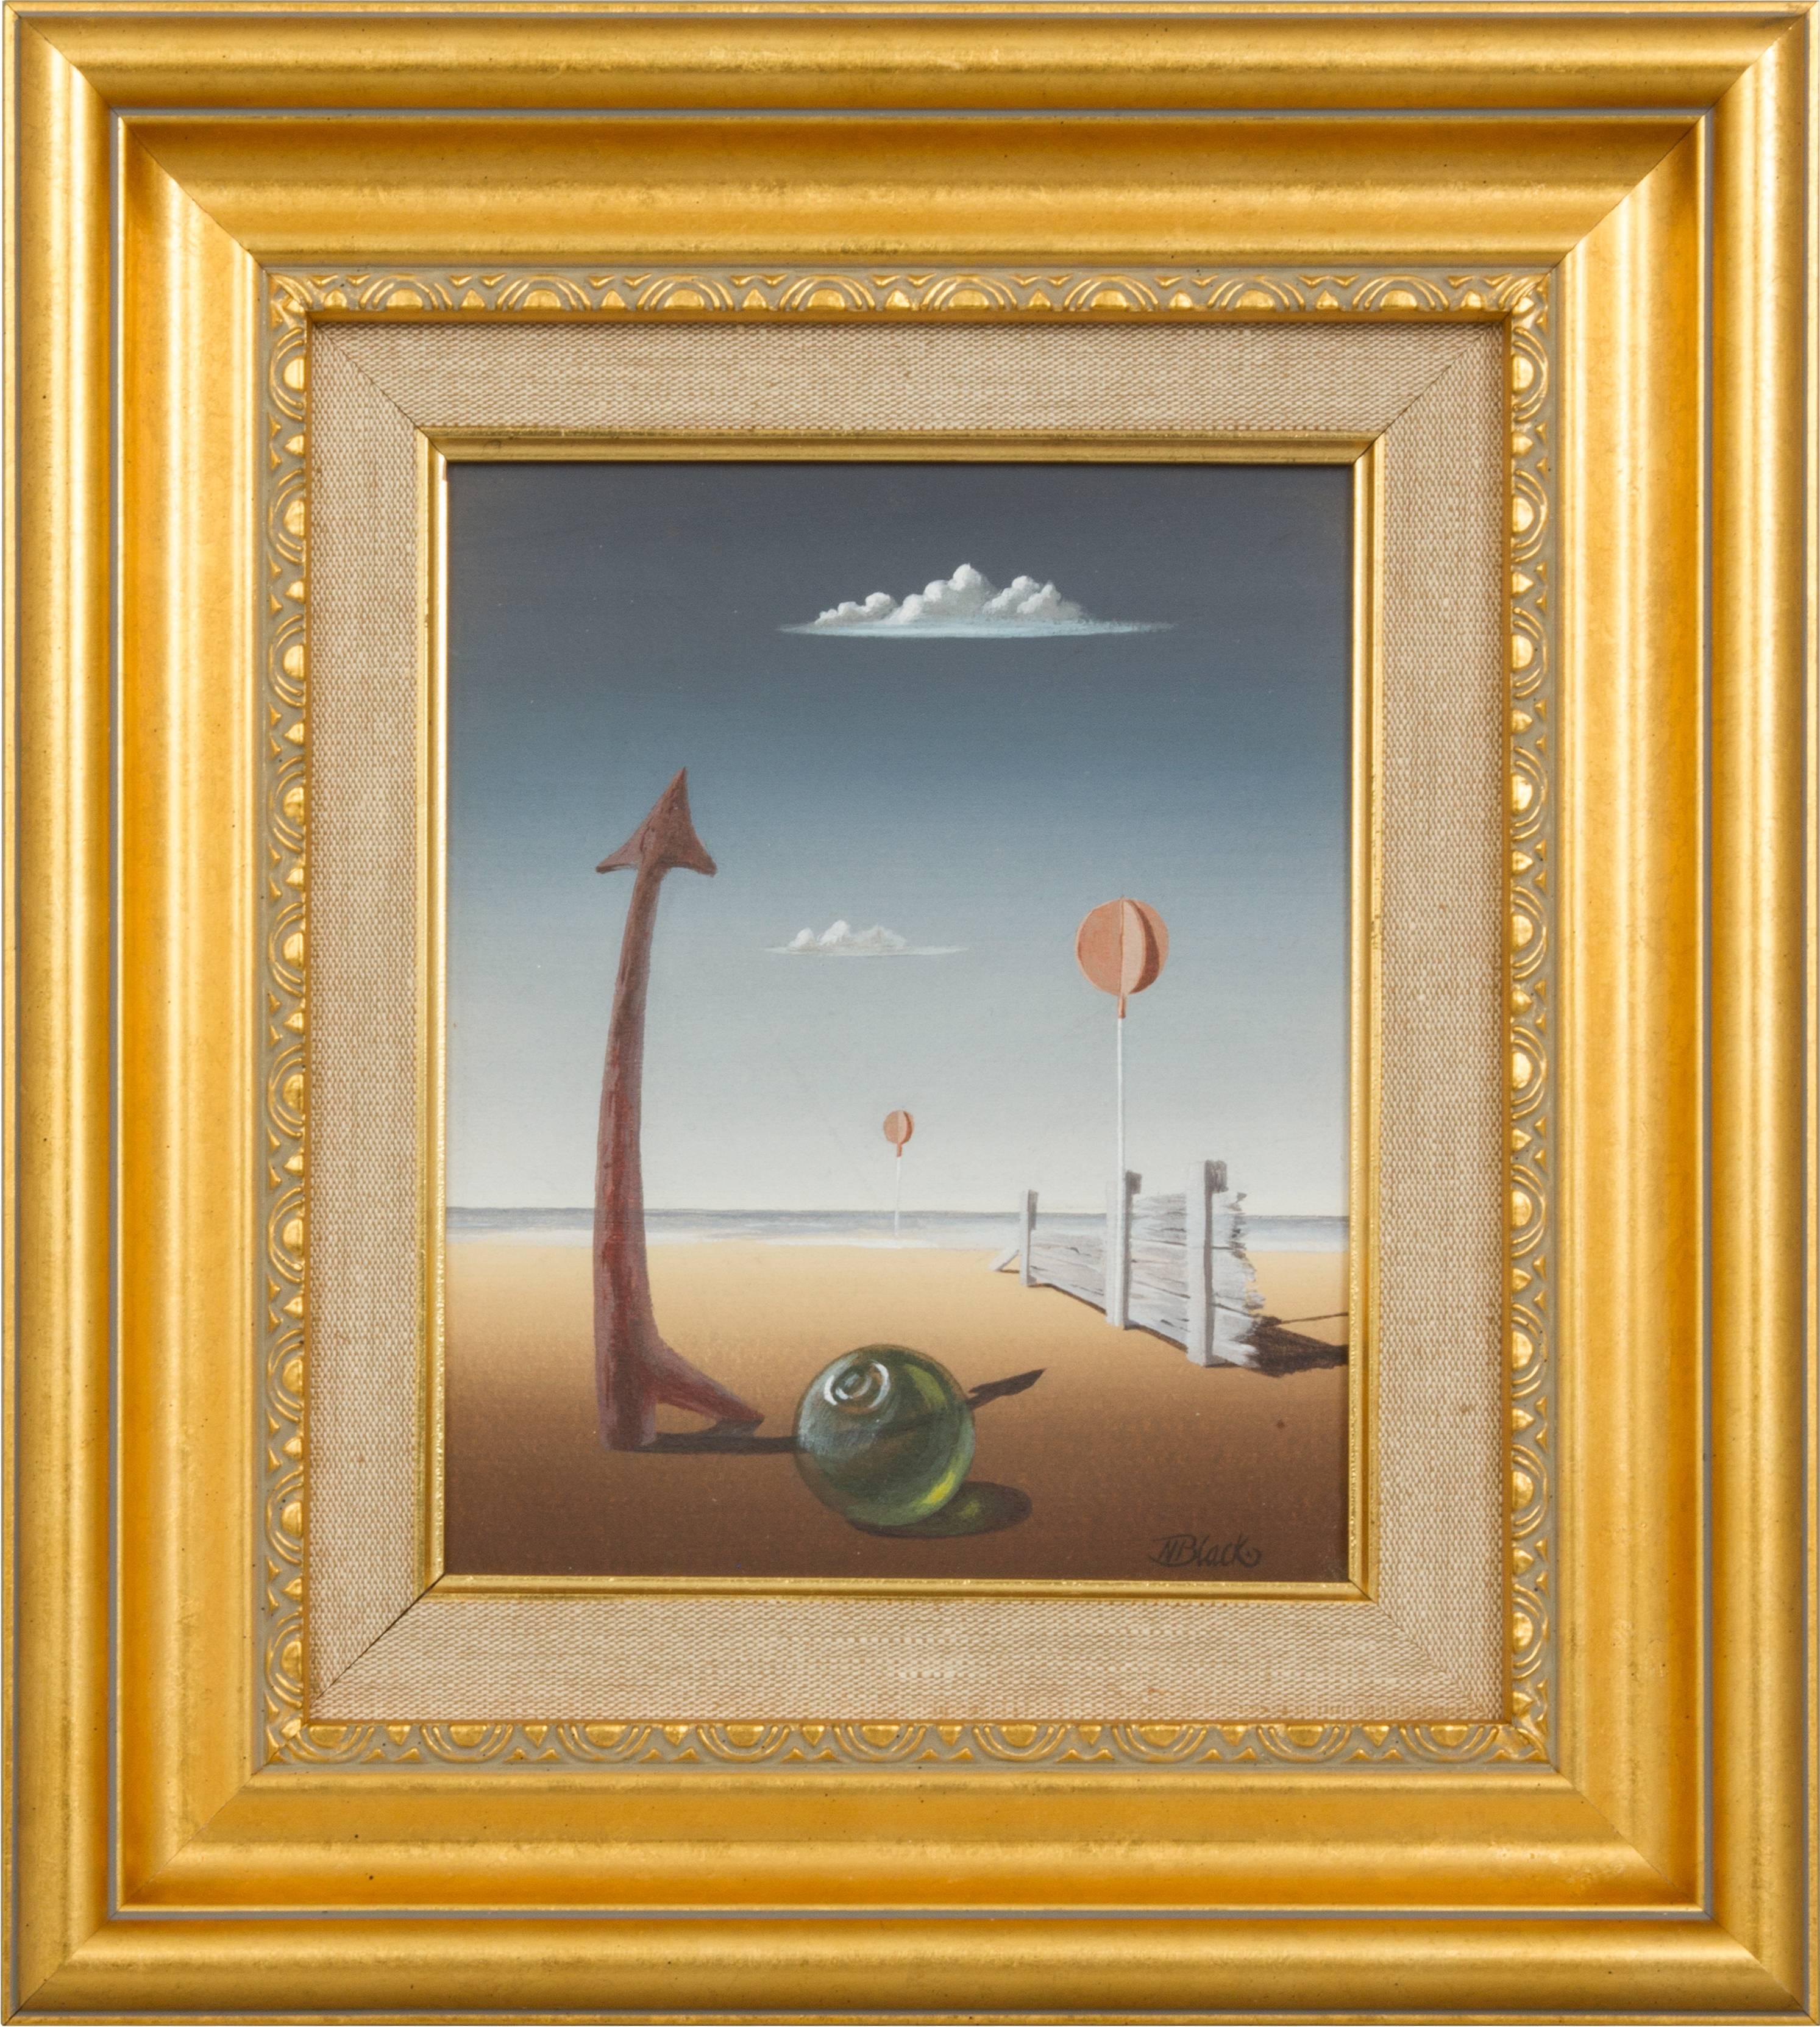 This is a beach scene with phallic imagery by Norman Black. The actual image is 4.38